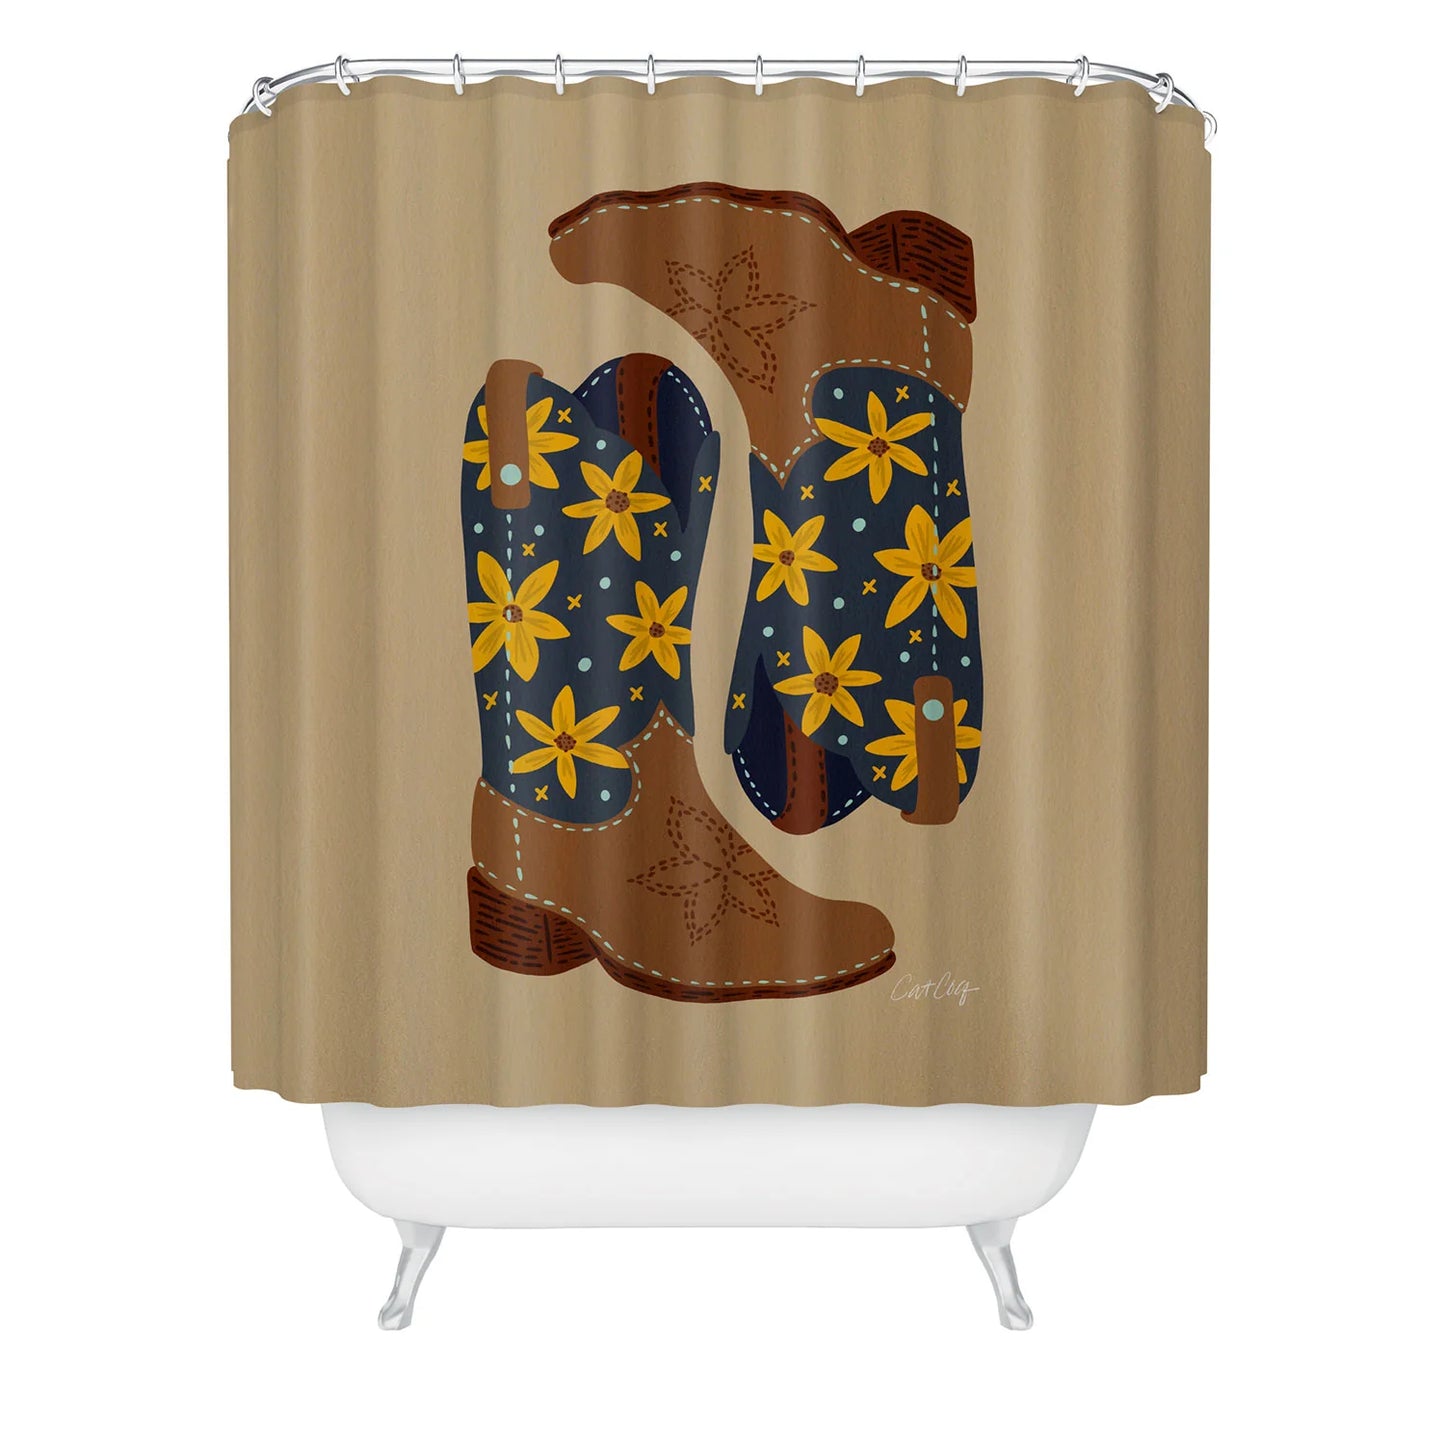 Cowgirl Boots Shower Curtain